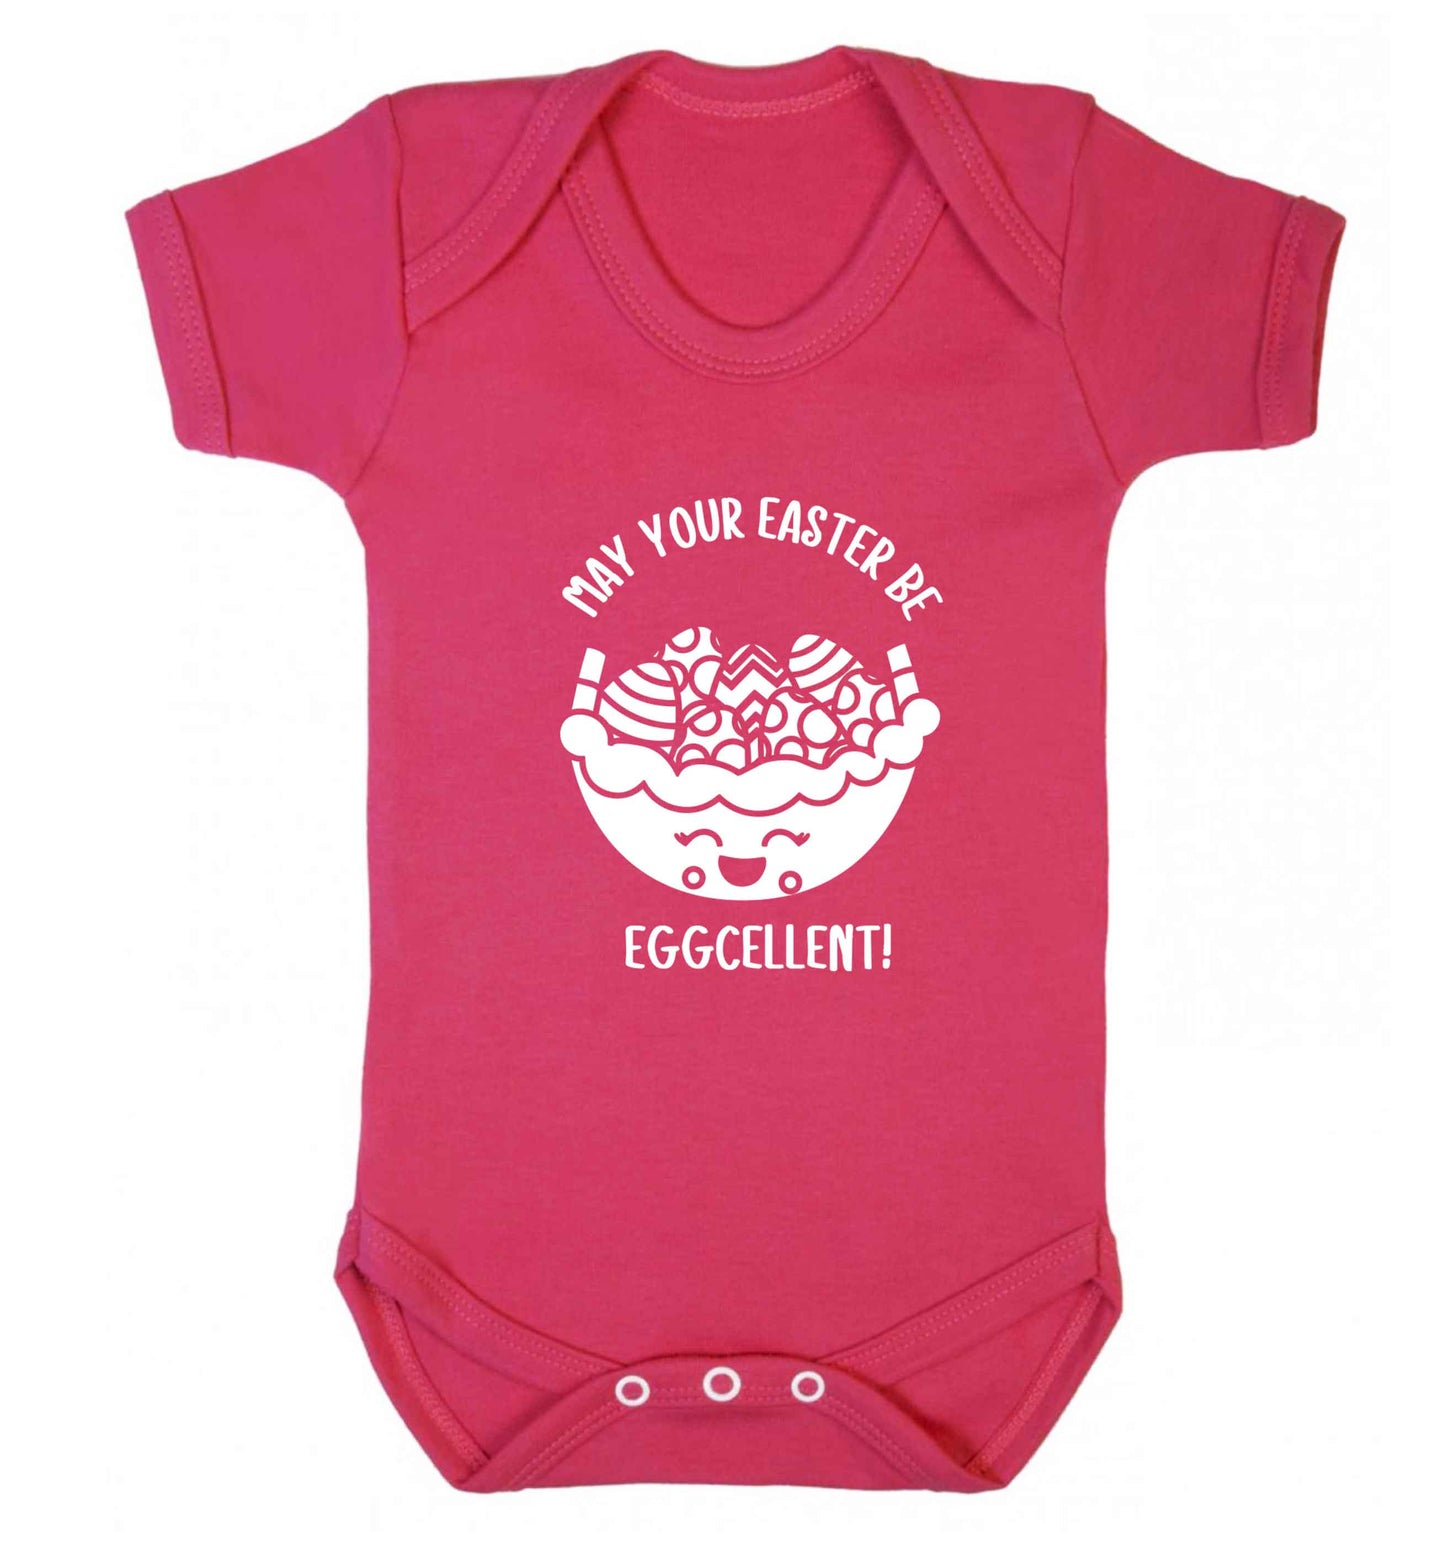 May your Easter be eggcellent baby vest dark pink 18-24 months